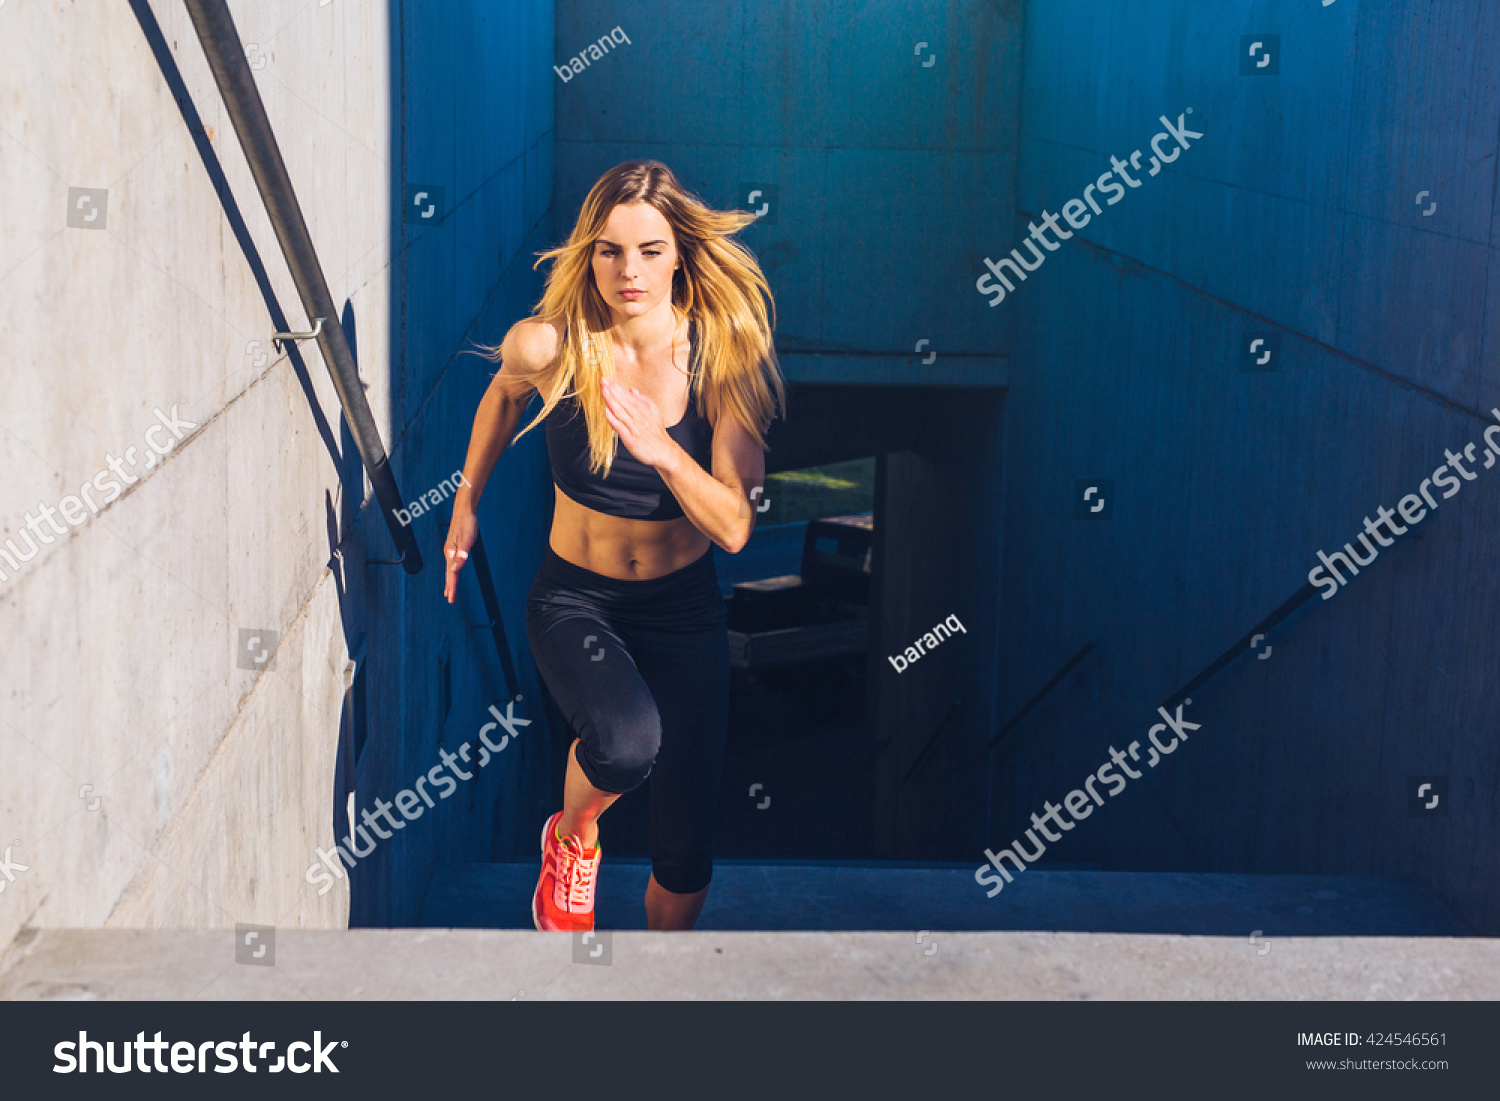 Female athlete running fast up the stairs - staircase workout #424546561